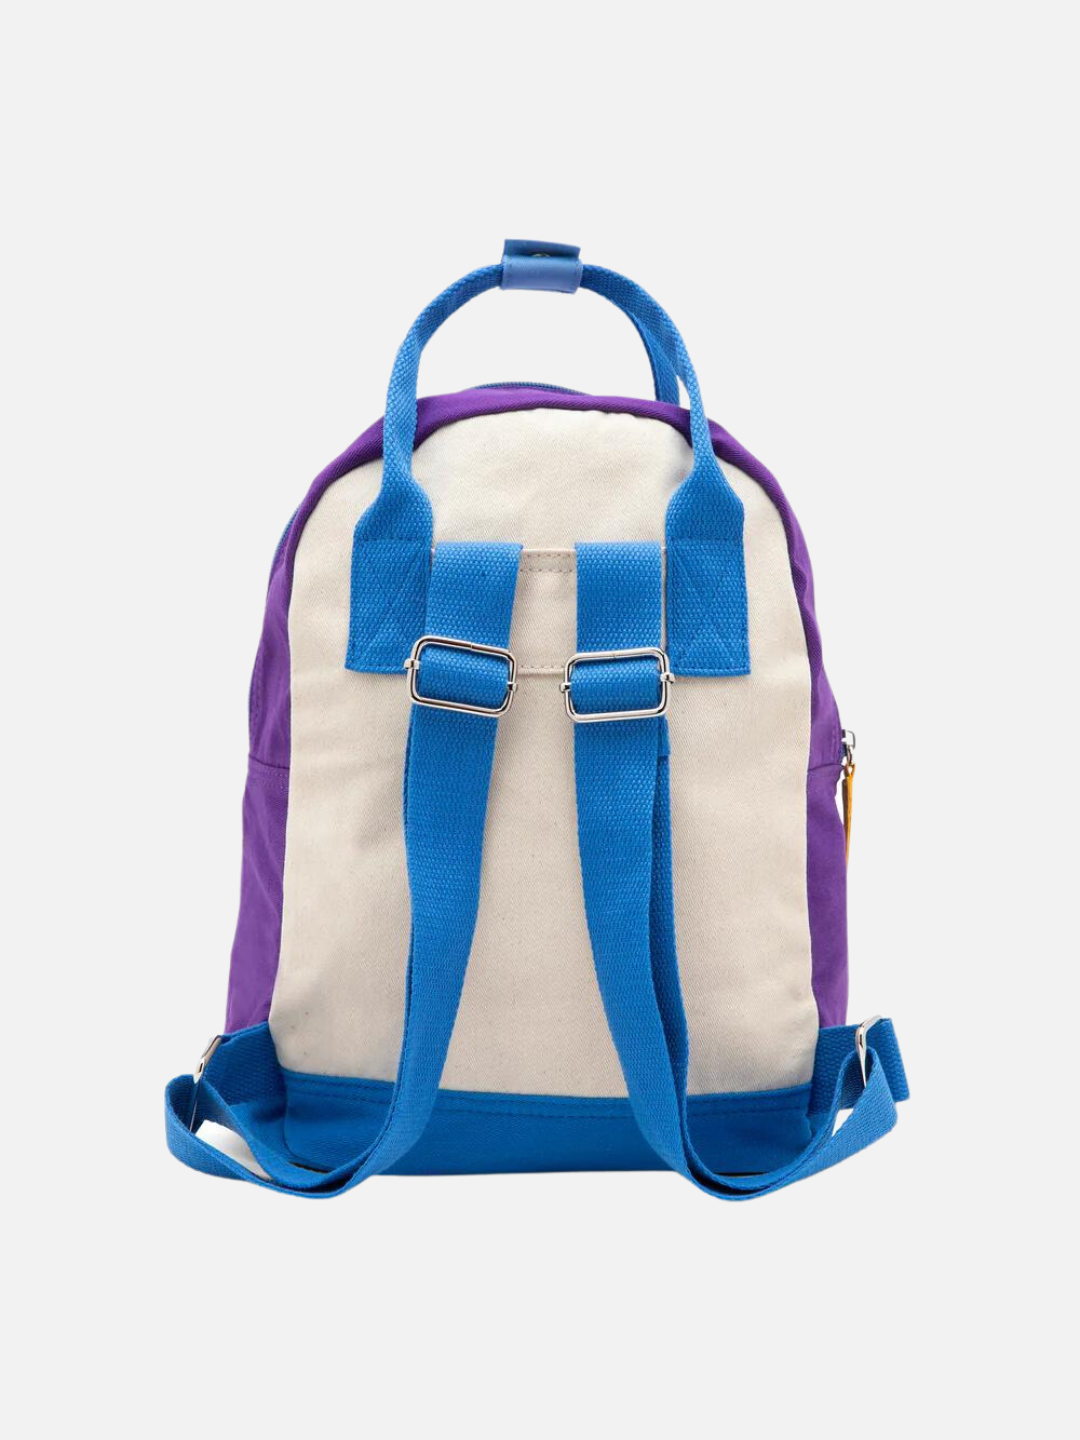 Coral Reef | Rear view of a colorblock backback with bright blue handles, straps and base, purple sides and a cream backing